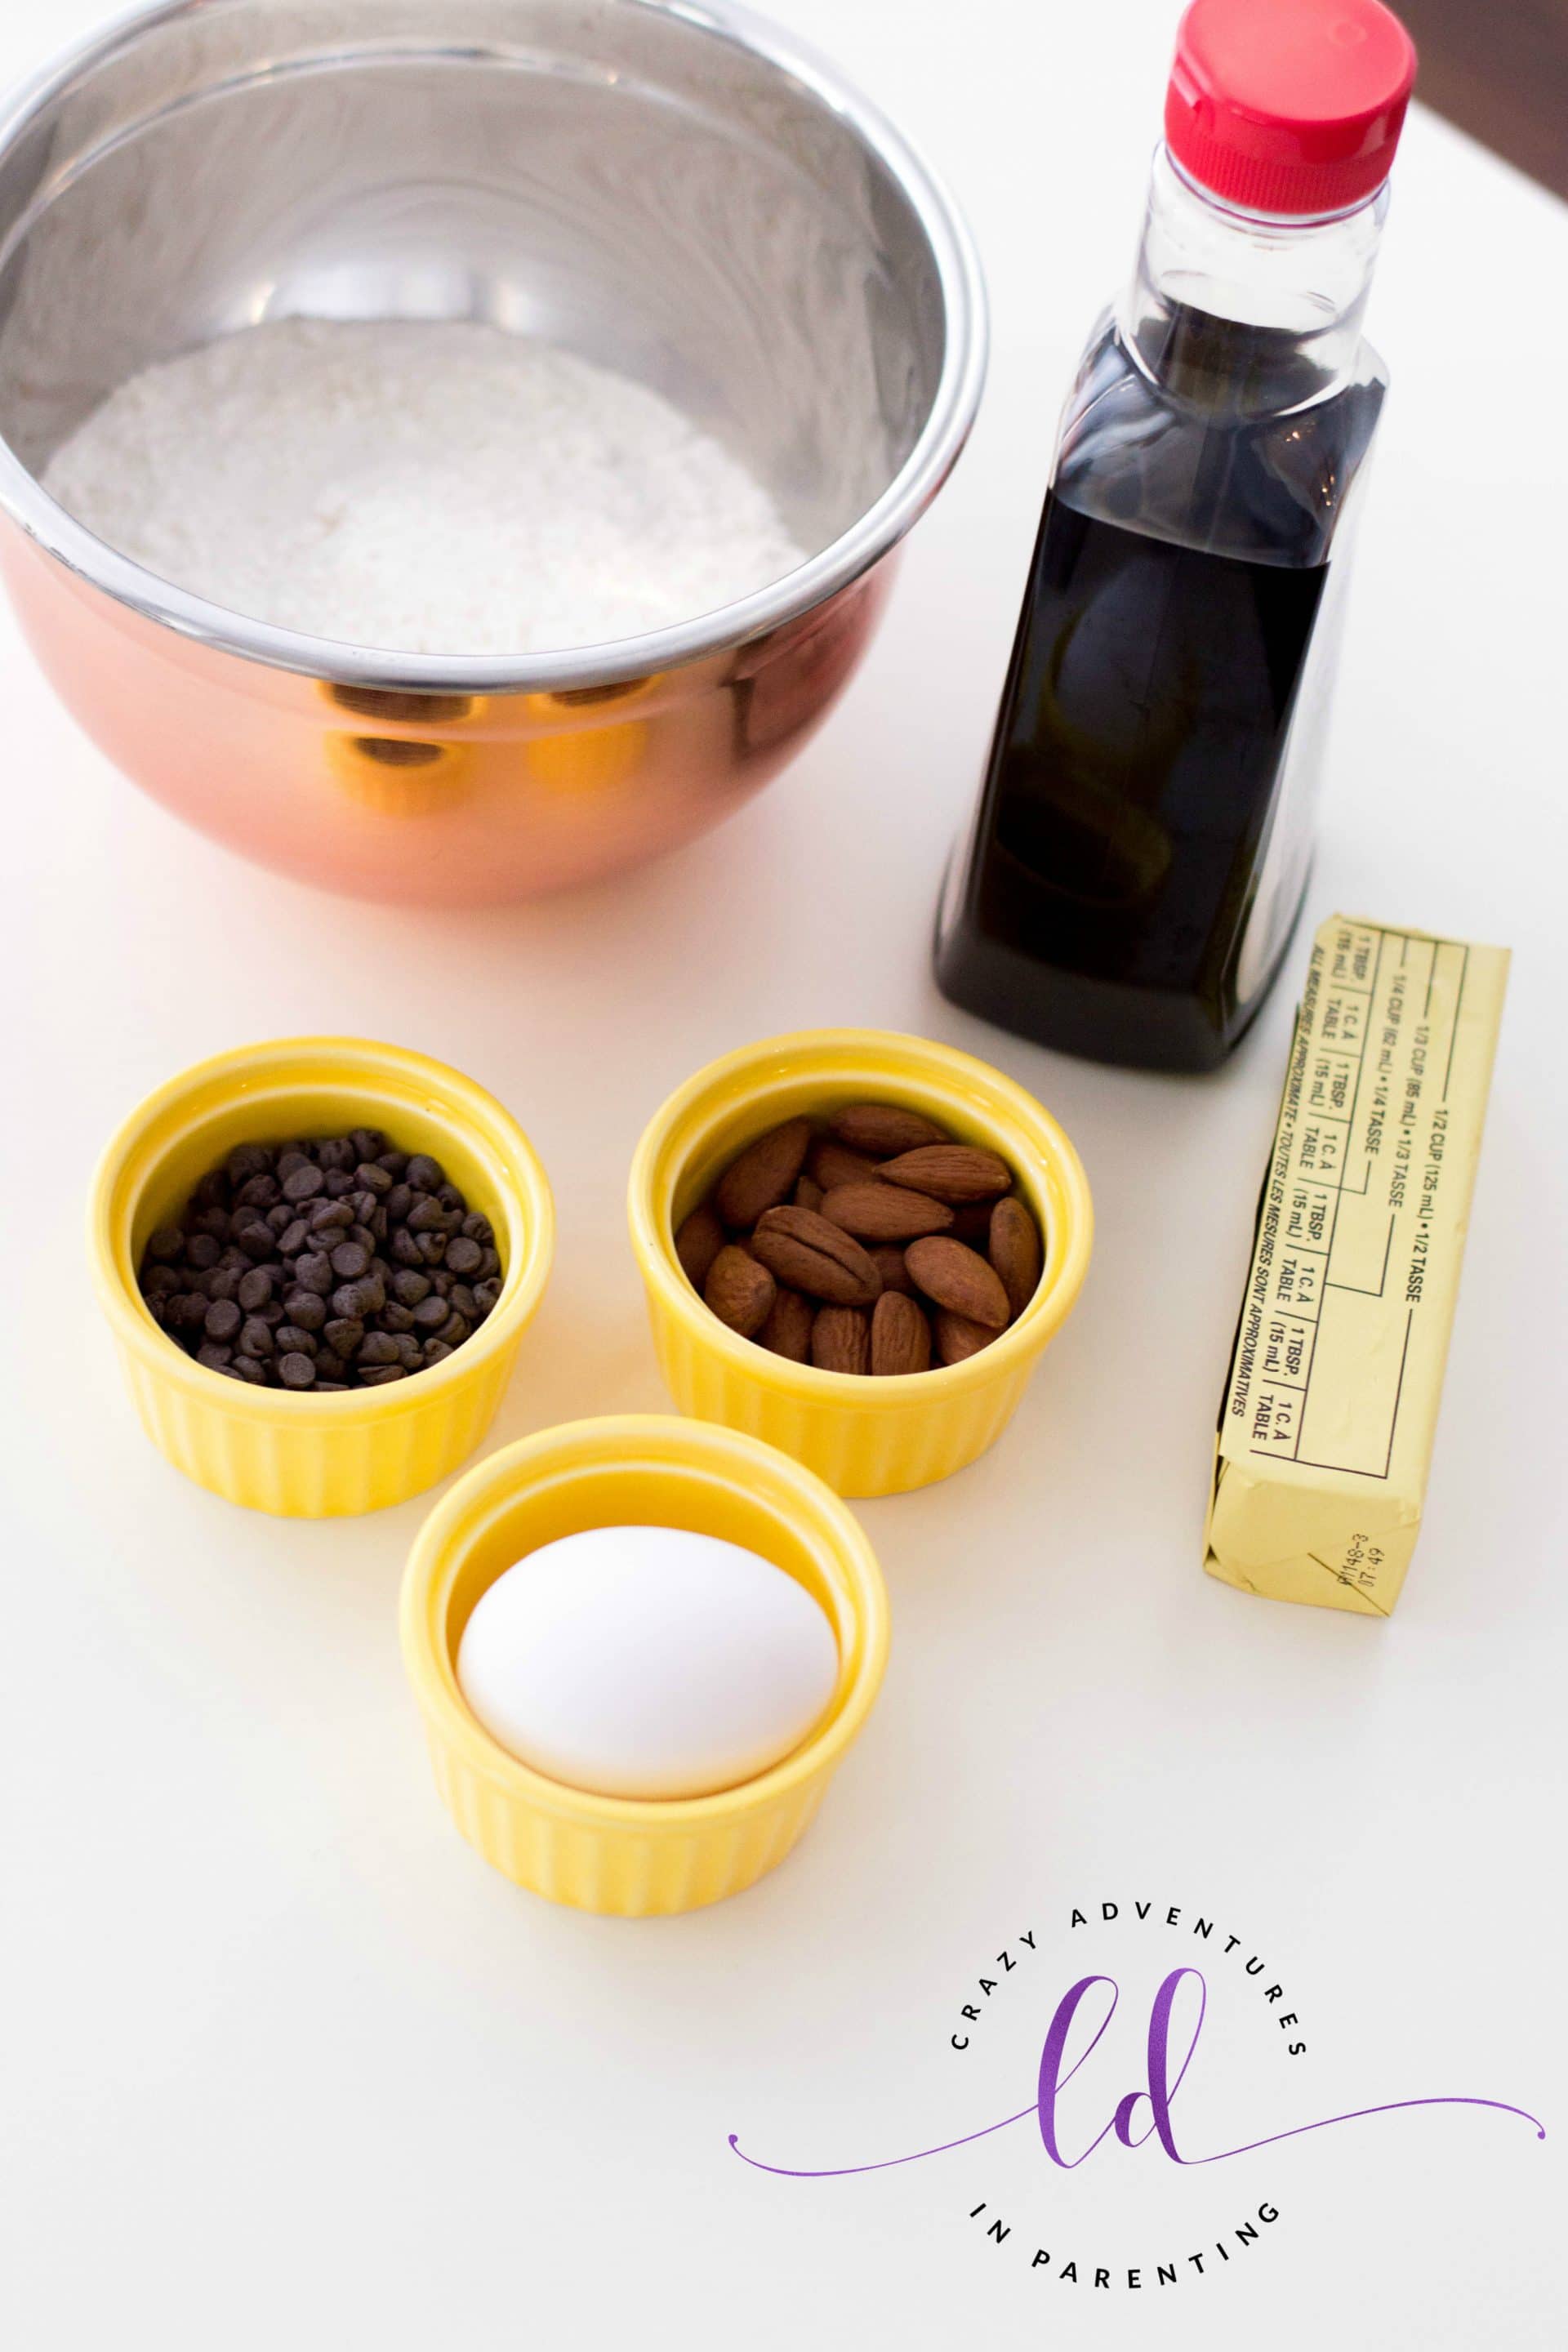 Ingredients for Chocolate Almond Thumbprint Cookies